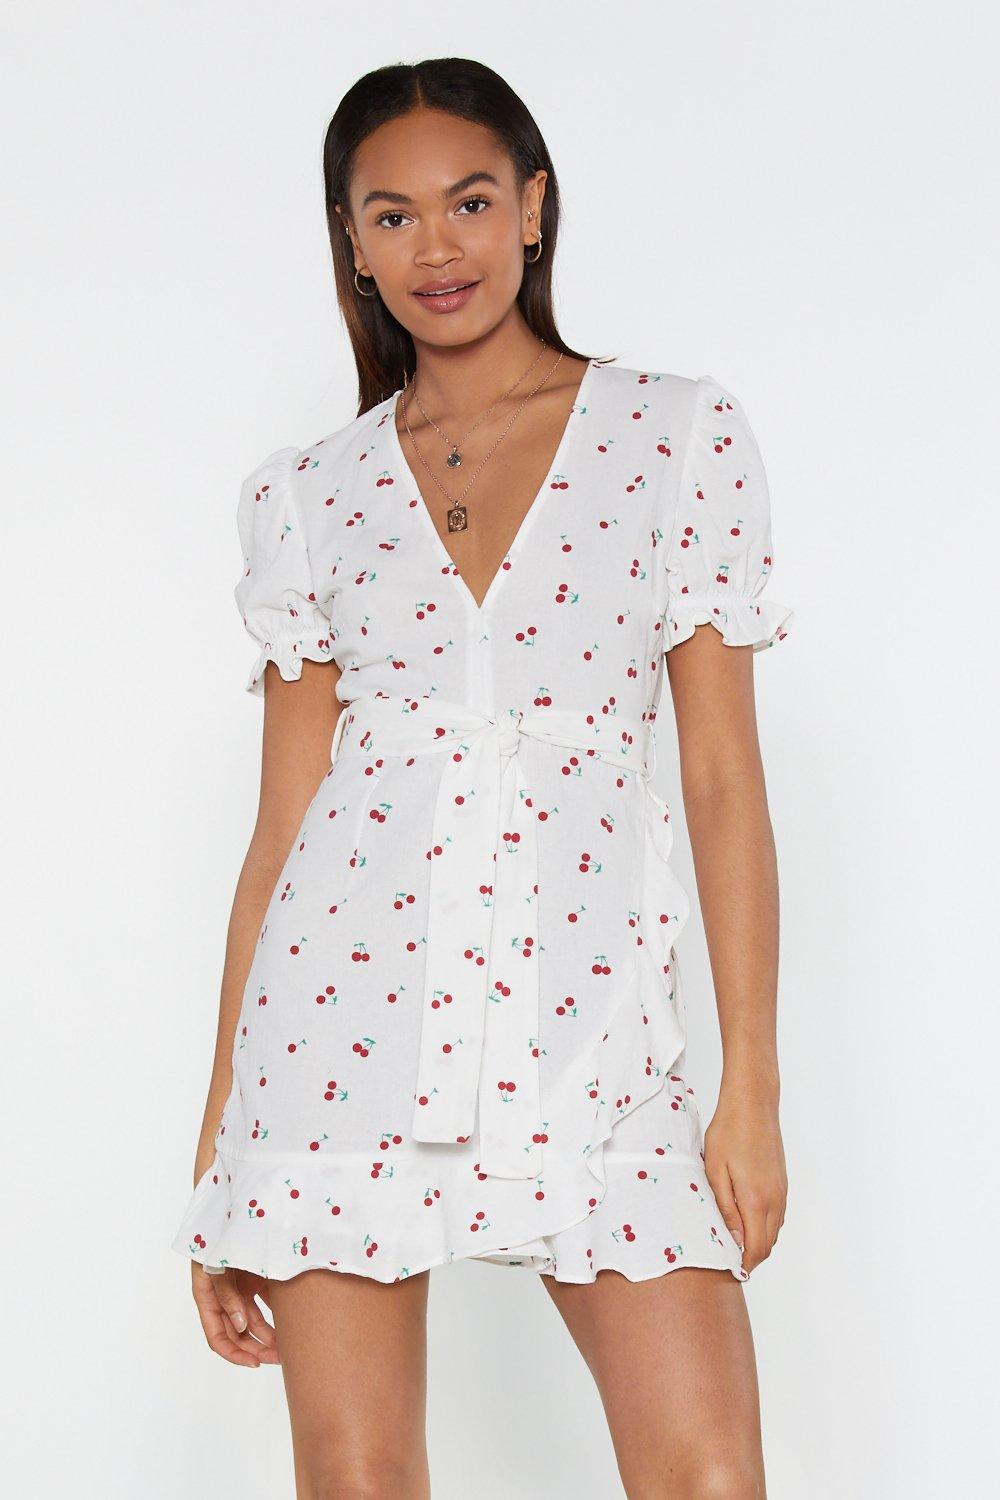 White Cherry Dress Clearance, 59% OFF ...